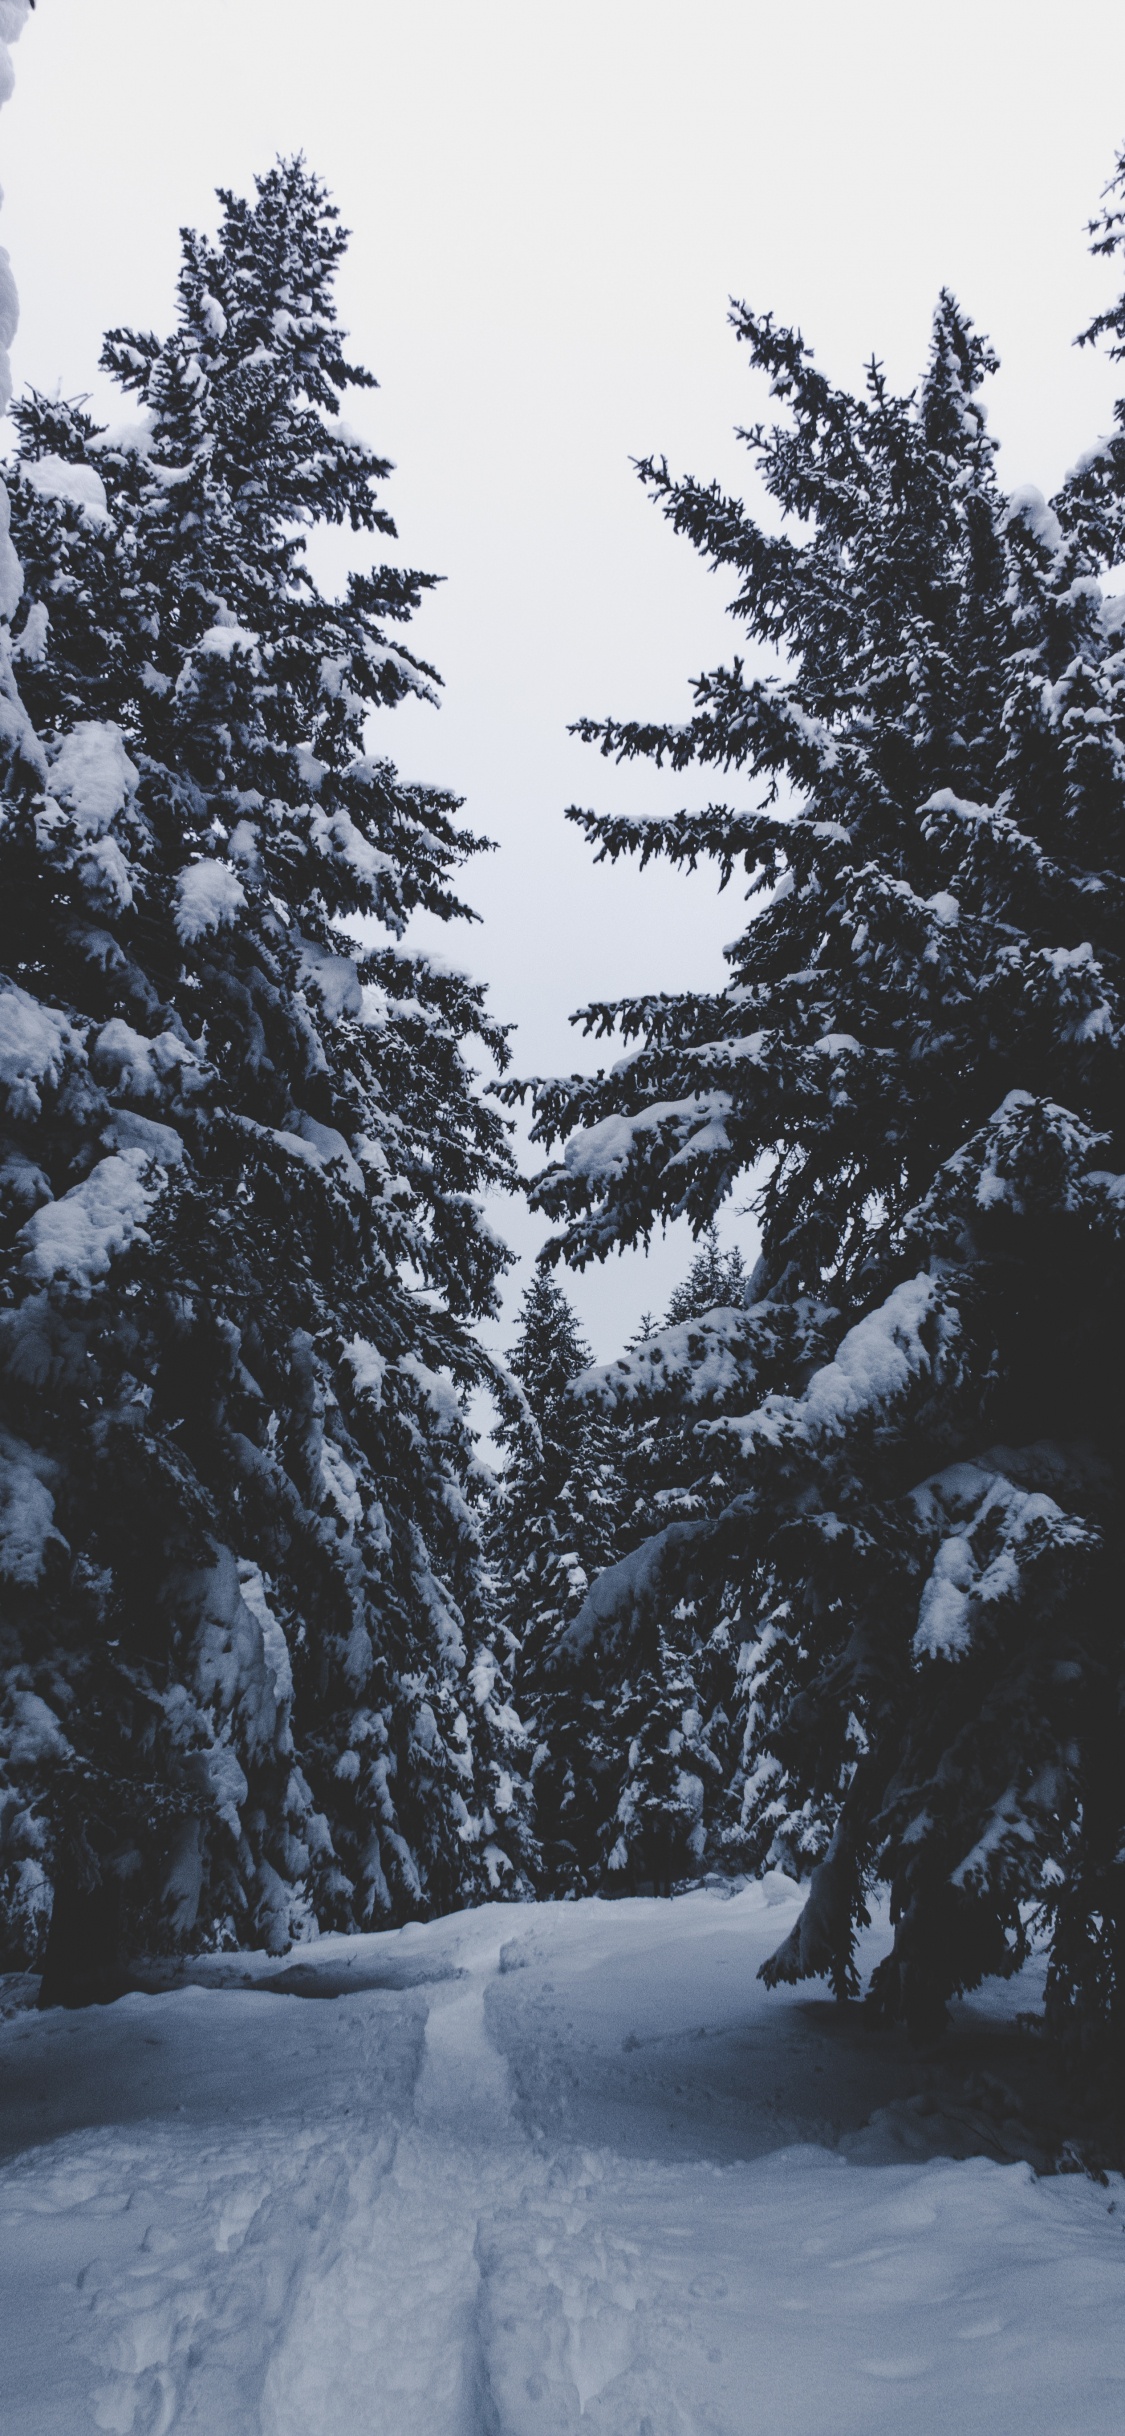 Neige, Hiver, Congélation, Plantes Ligneuses, Sapin. Wallpaper in 1125x2436 Resolution